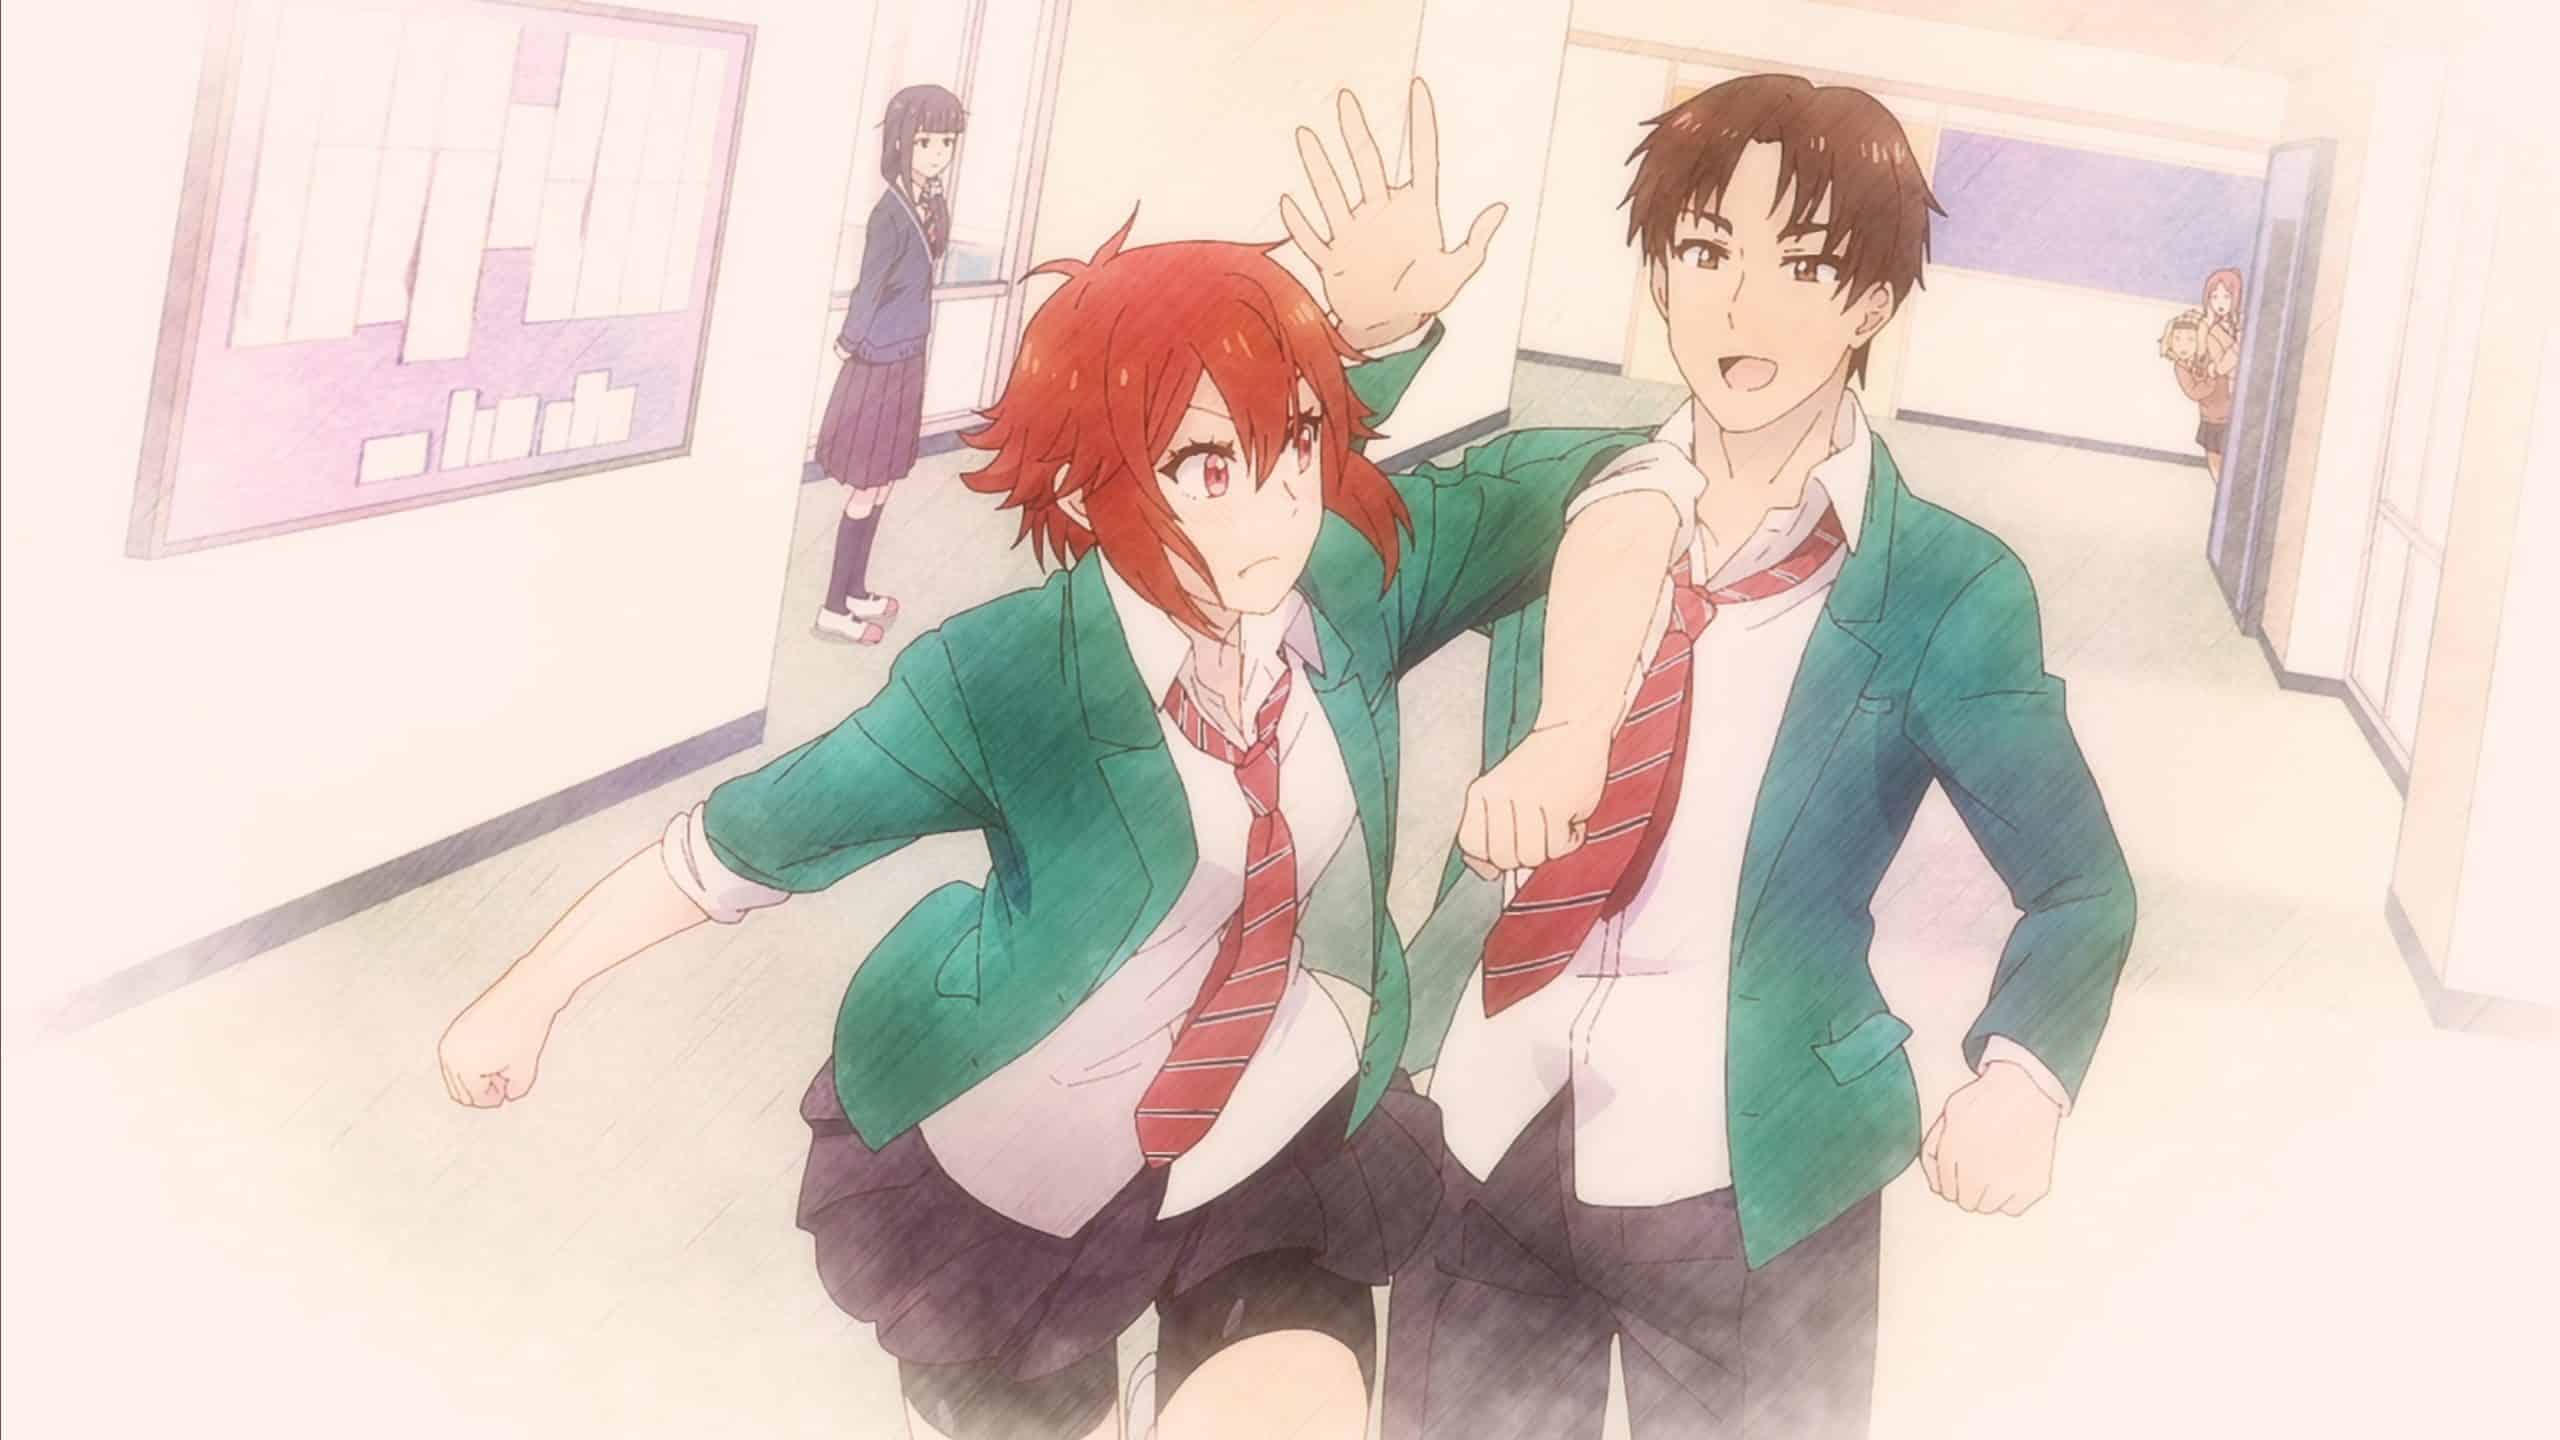 Tomo-chan Is a Girl: Season 1/ Episode 1 “I Want to Be Seen as a Girl!” (Premiere) – Recap/ Review (with Spoilers)